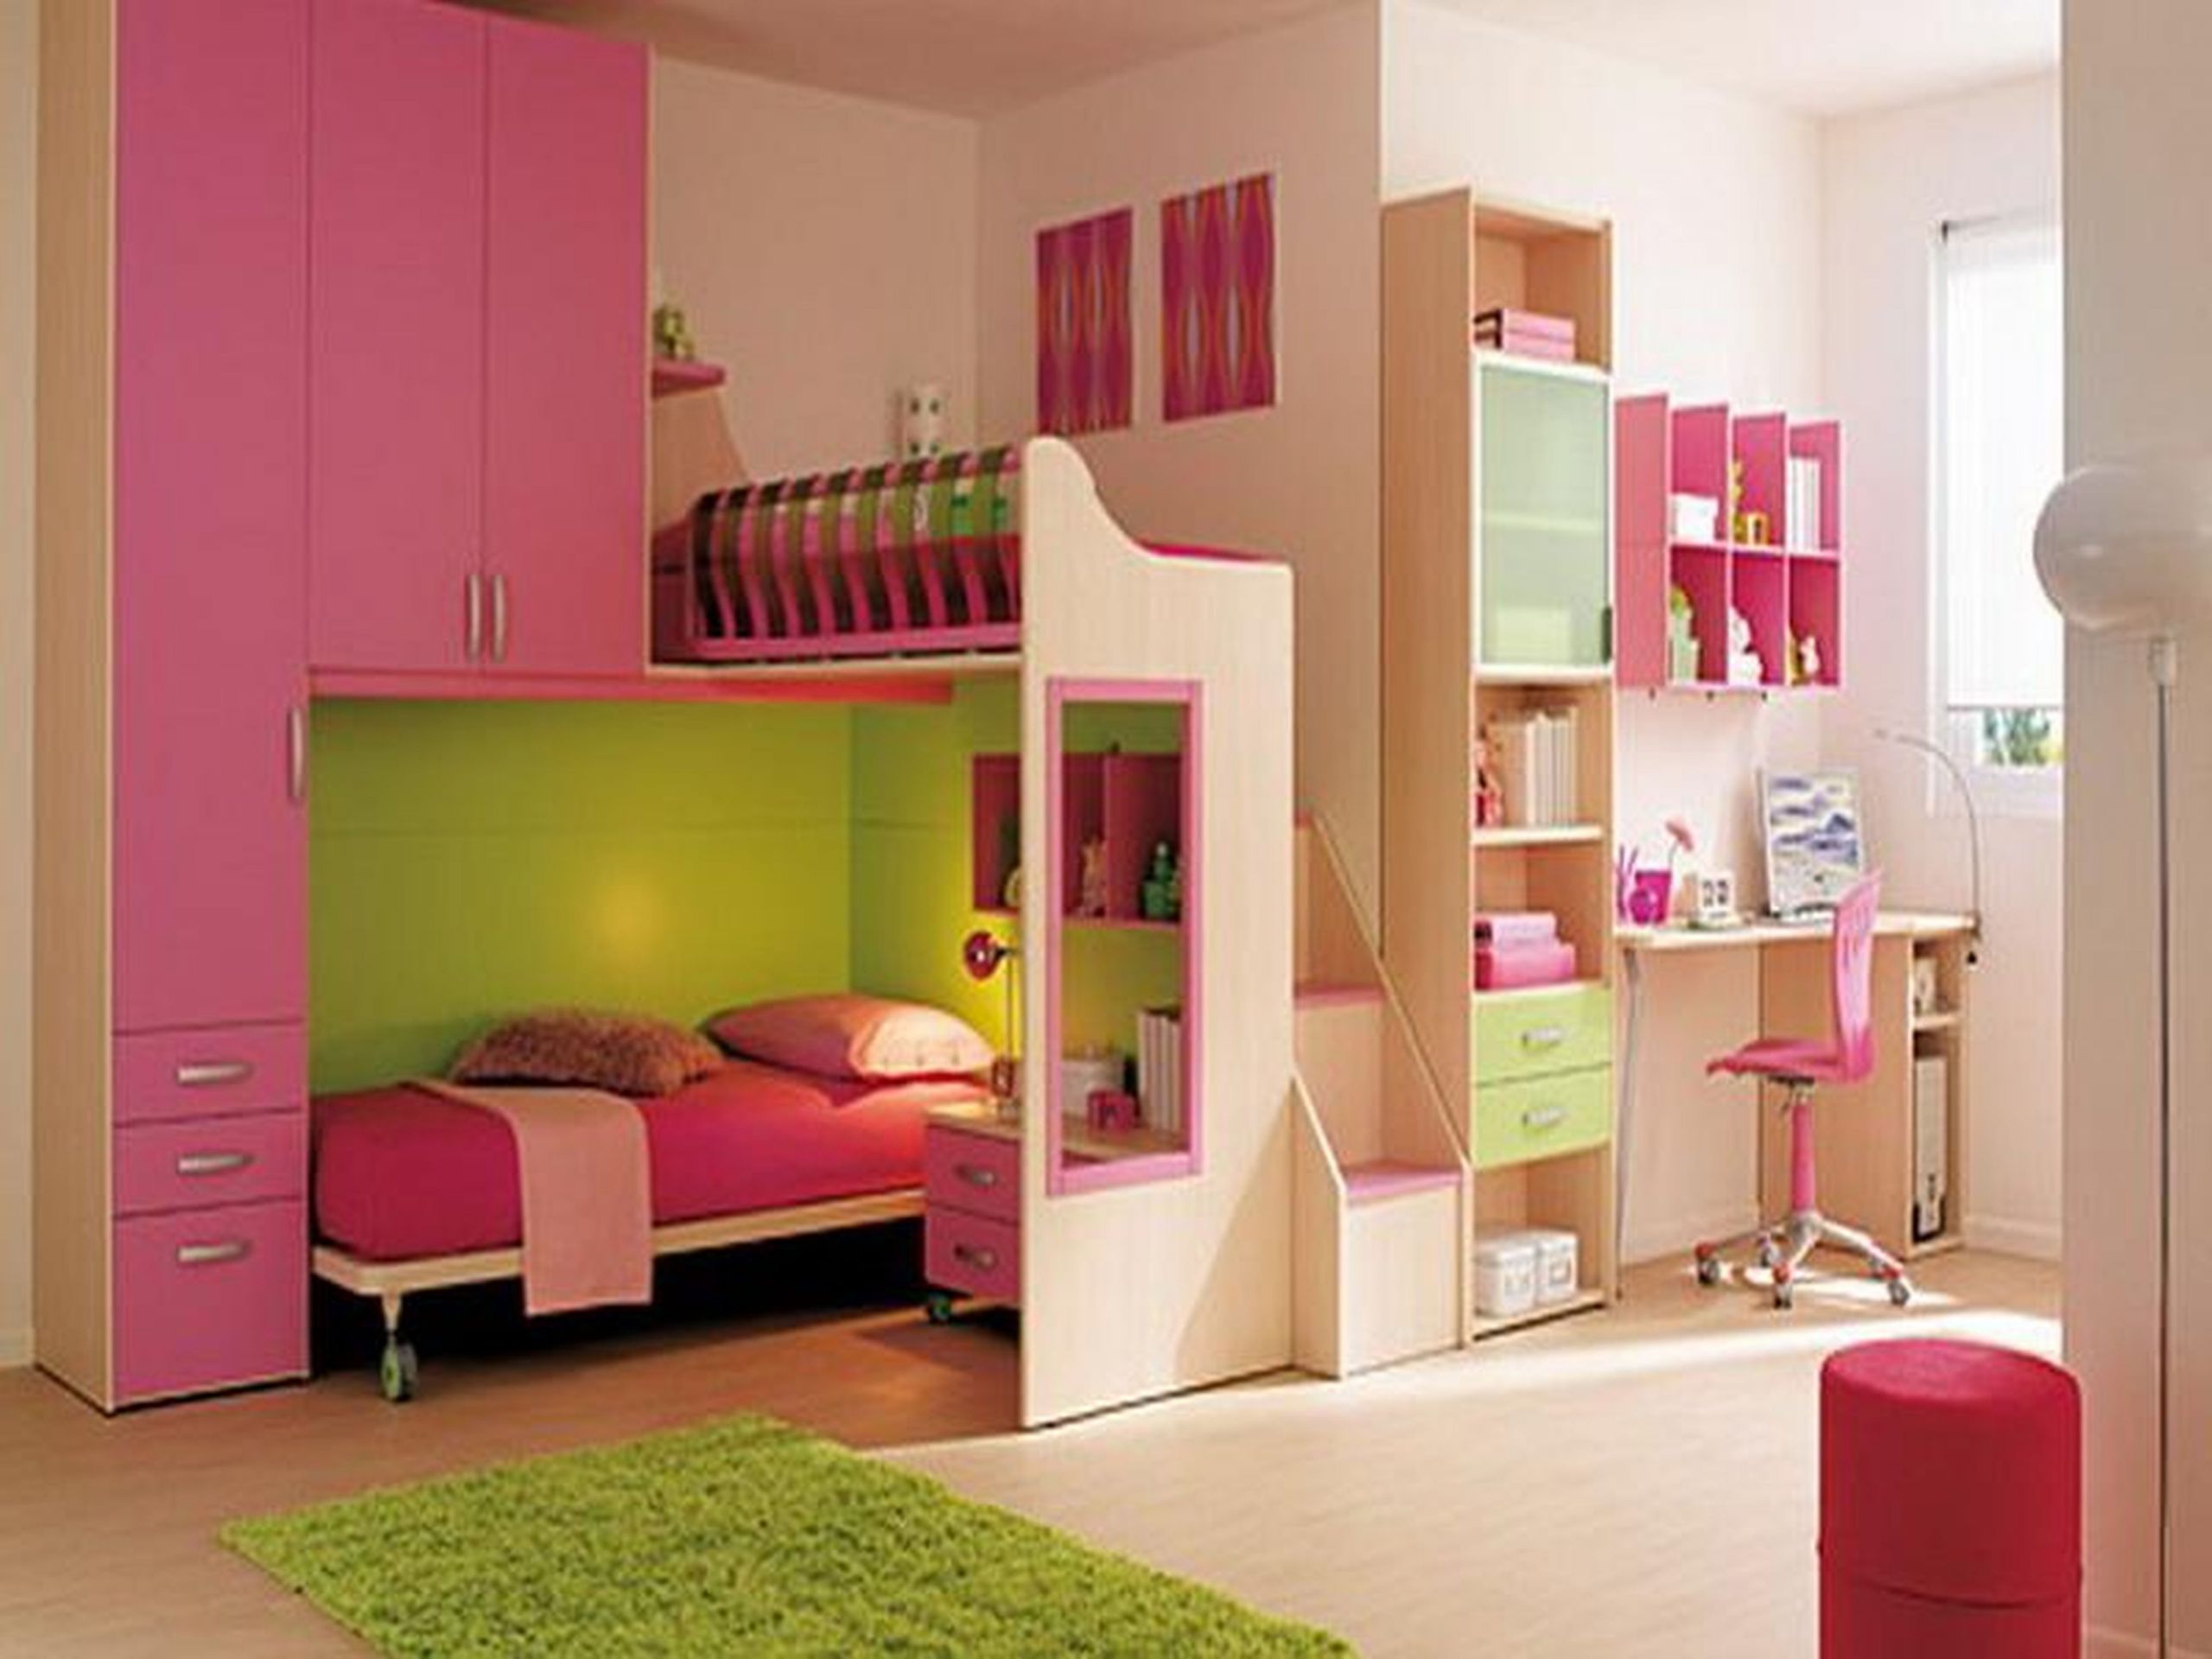 Storage For Kids Room
 DIY Storage Ideas For Kids Room Crafts To Do With Kids